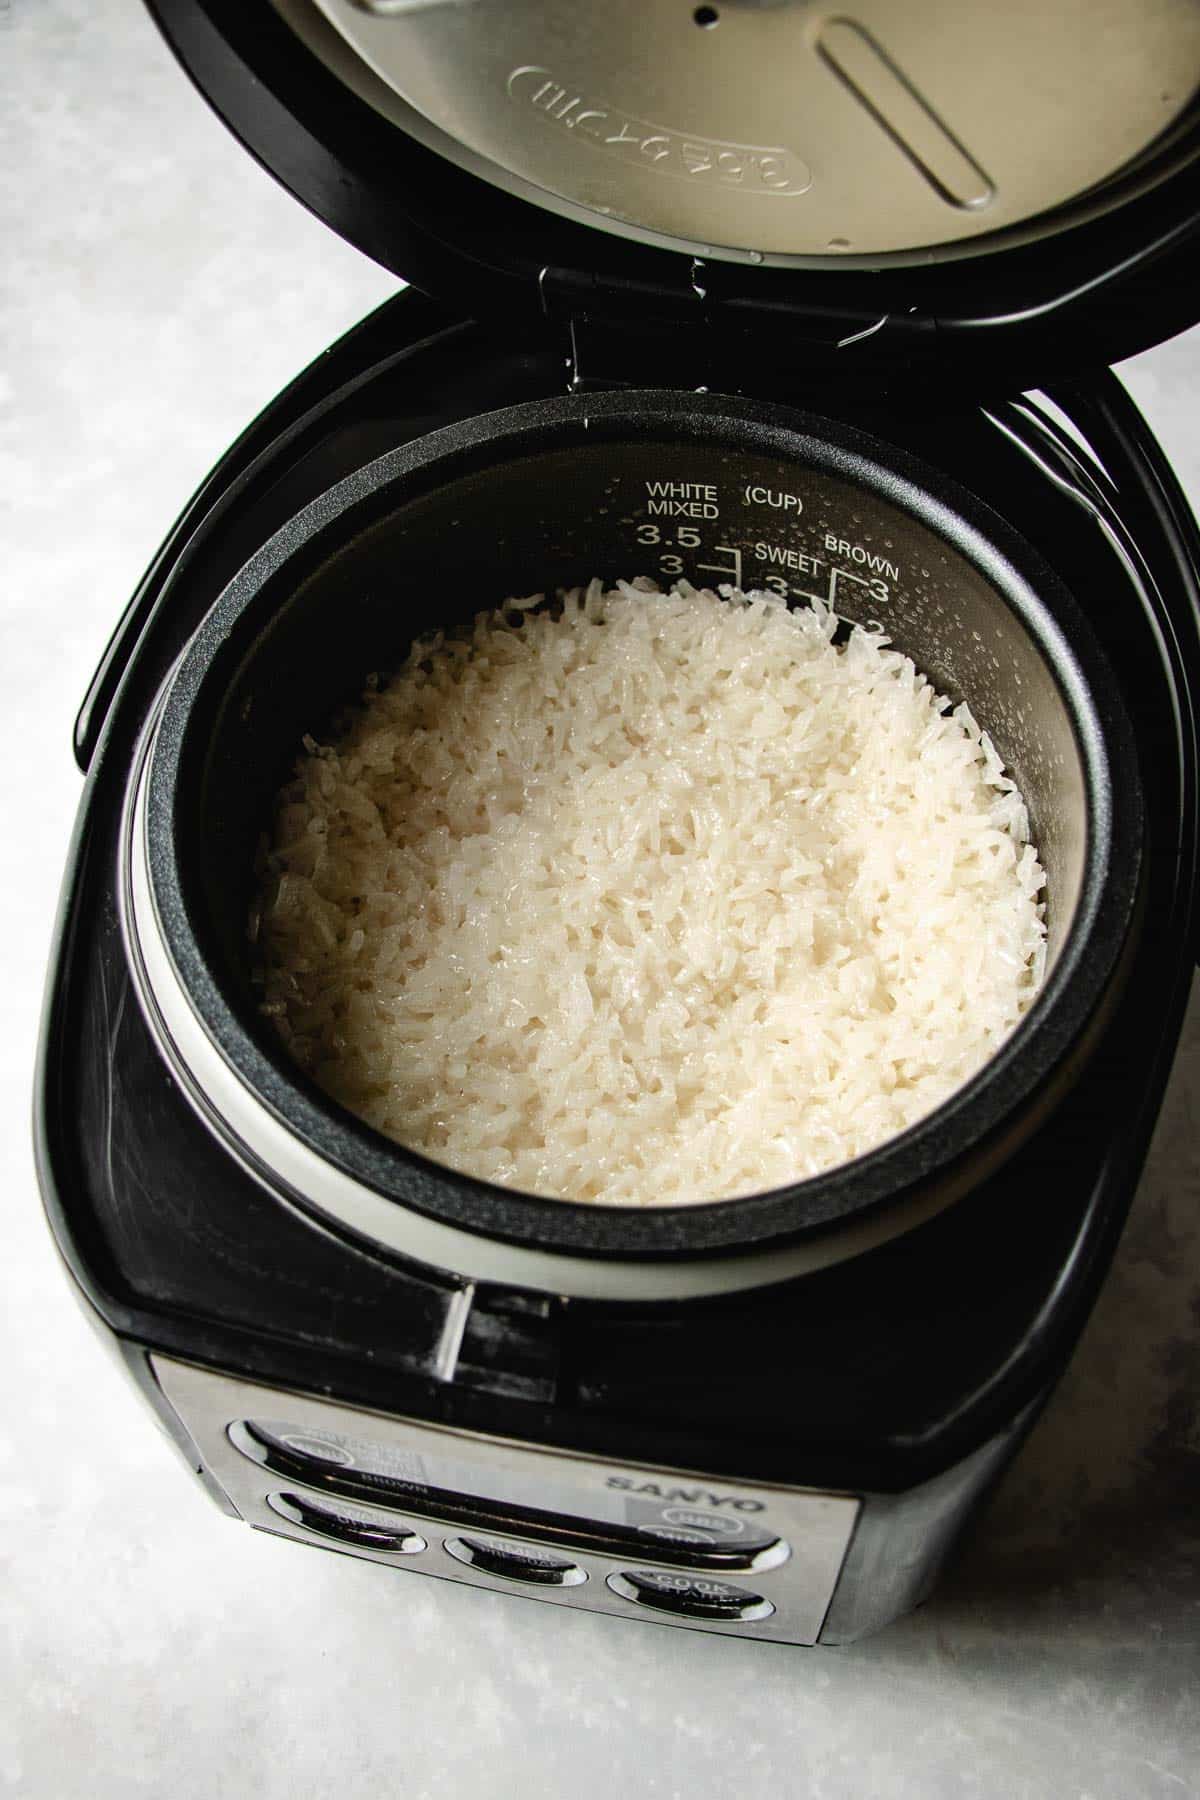 Feature image shows sticky rice made in a rice cooker.